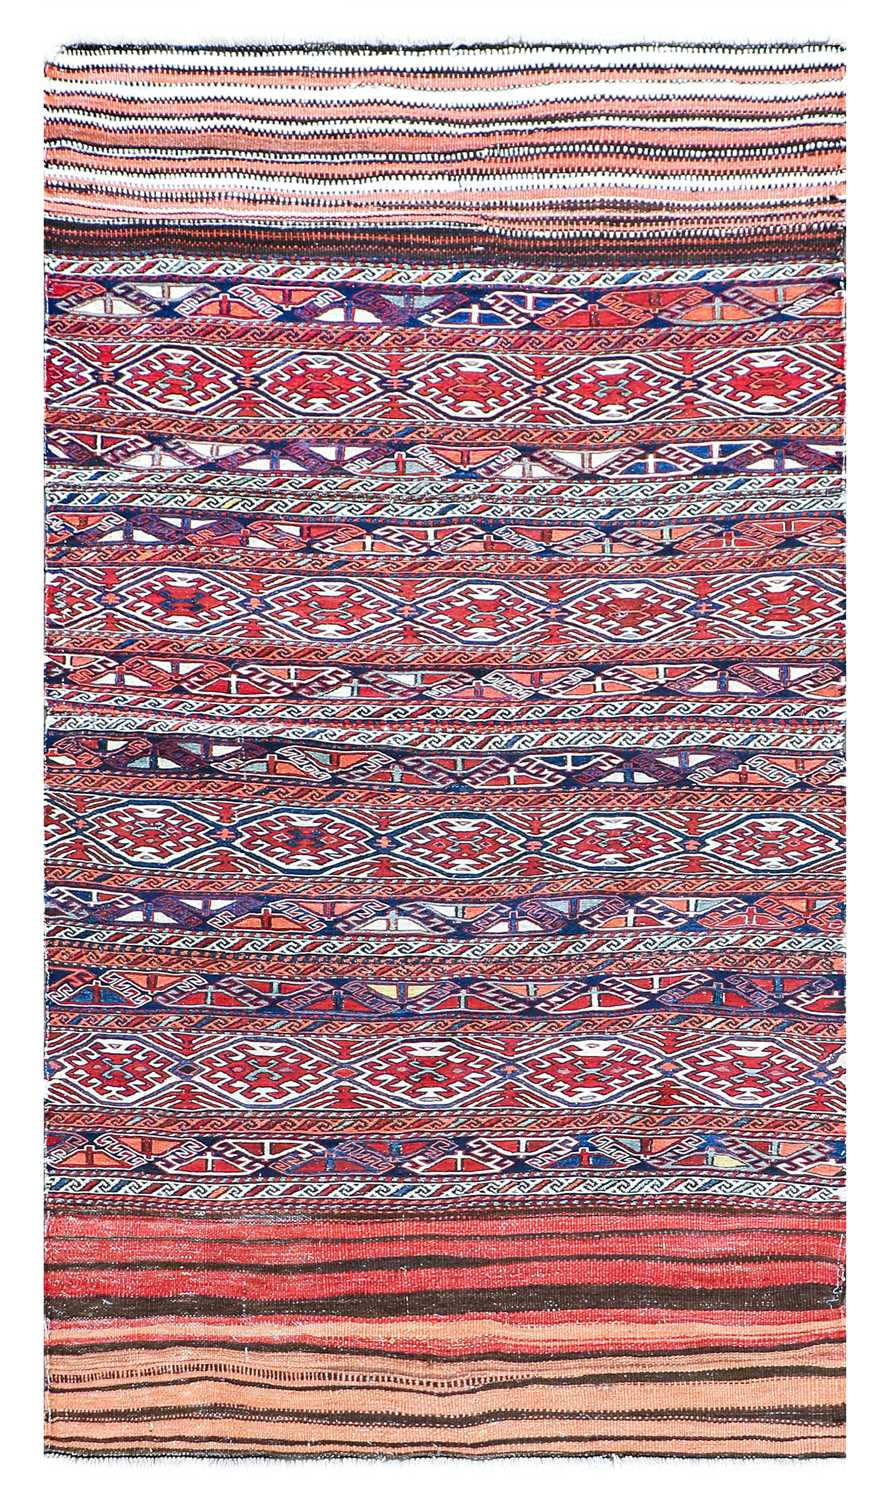 ~ Kurdish Flat Woven Rug North West Iran, circa 1930 The field comprised of polychrome bands of - Image 3 of 4